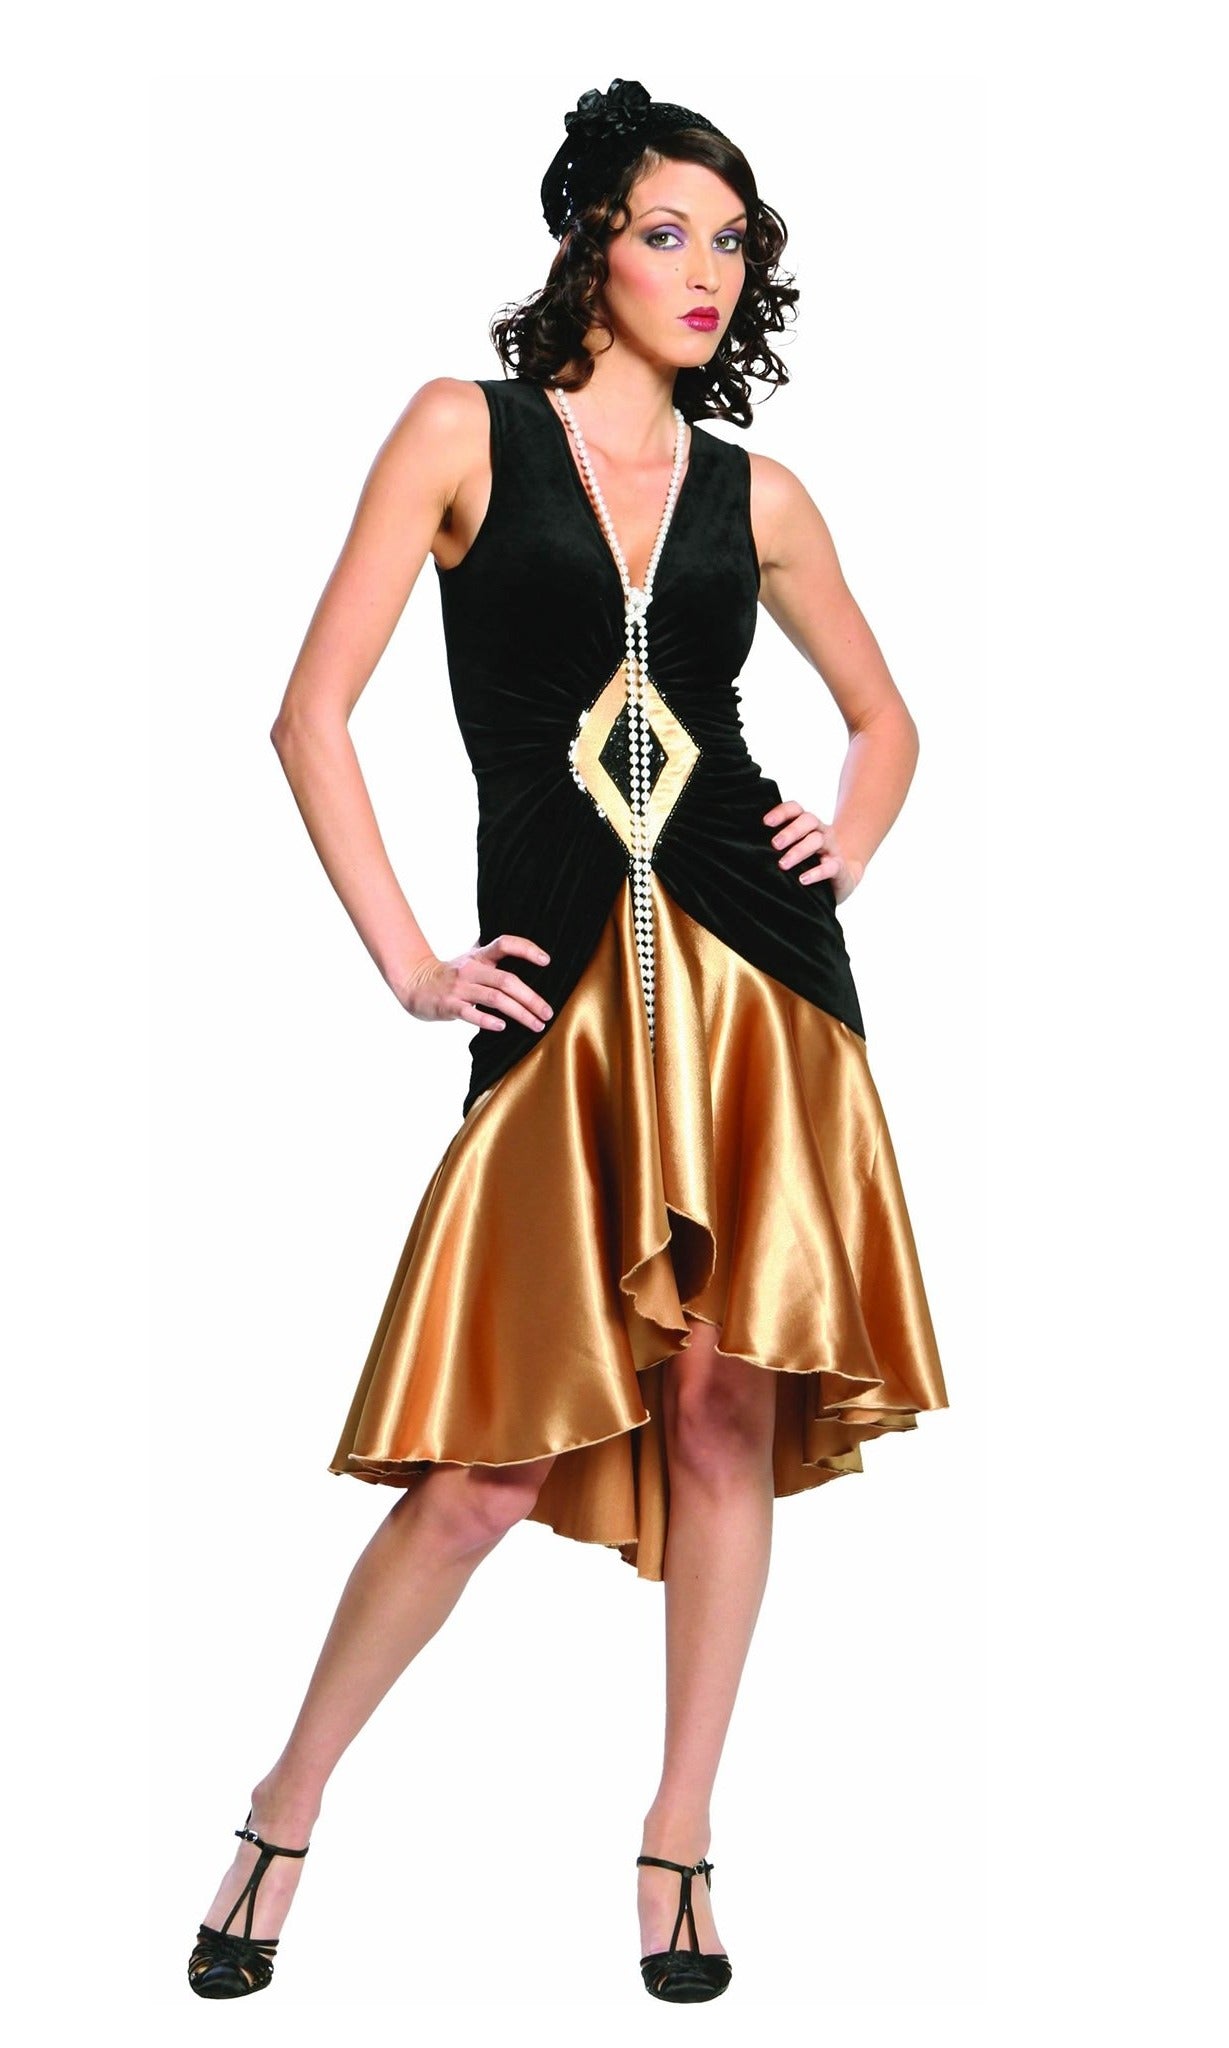 Gold and black 1920s flapper dress with hat and necklace